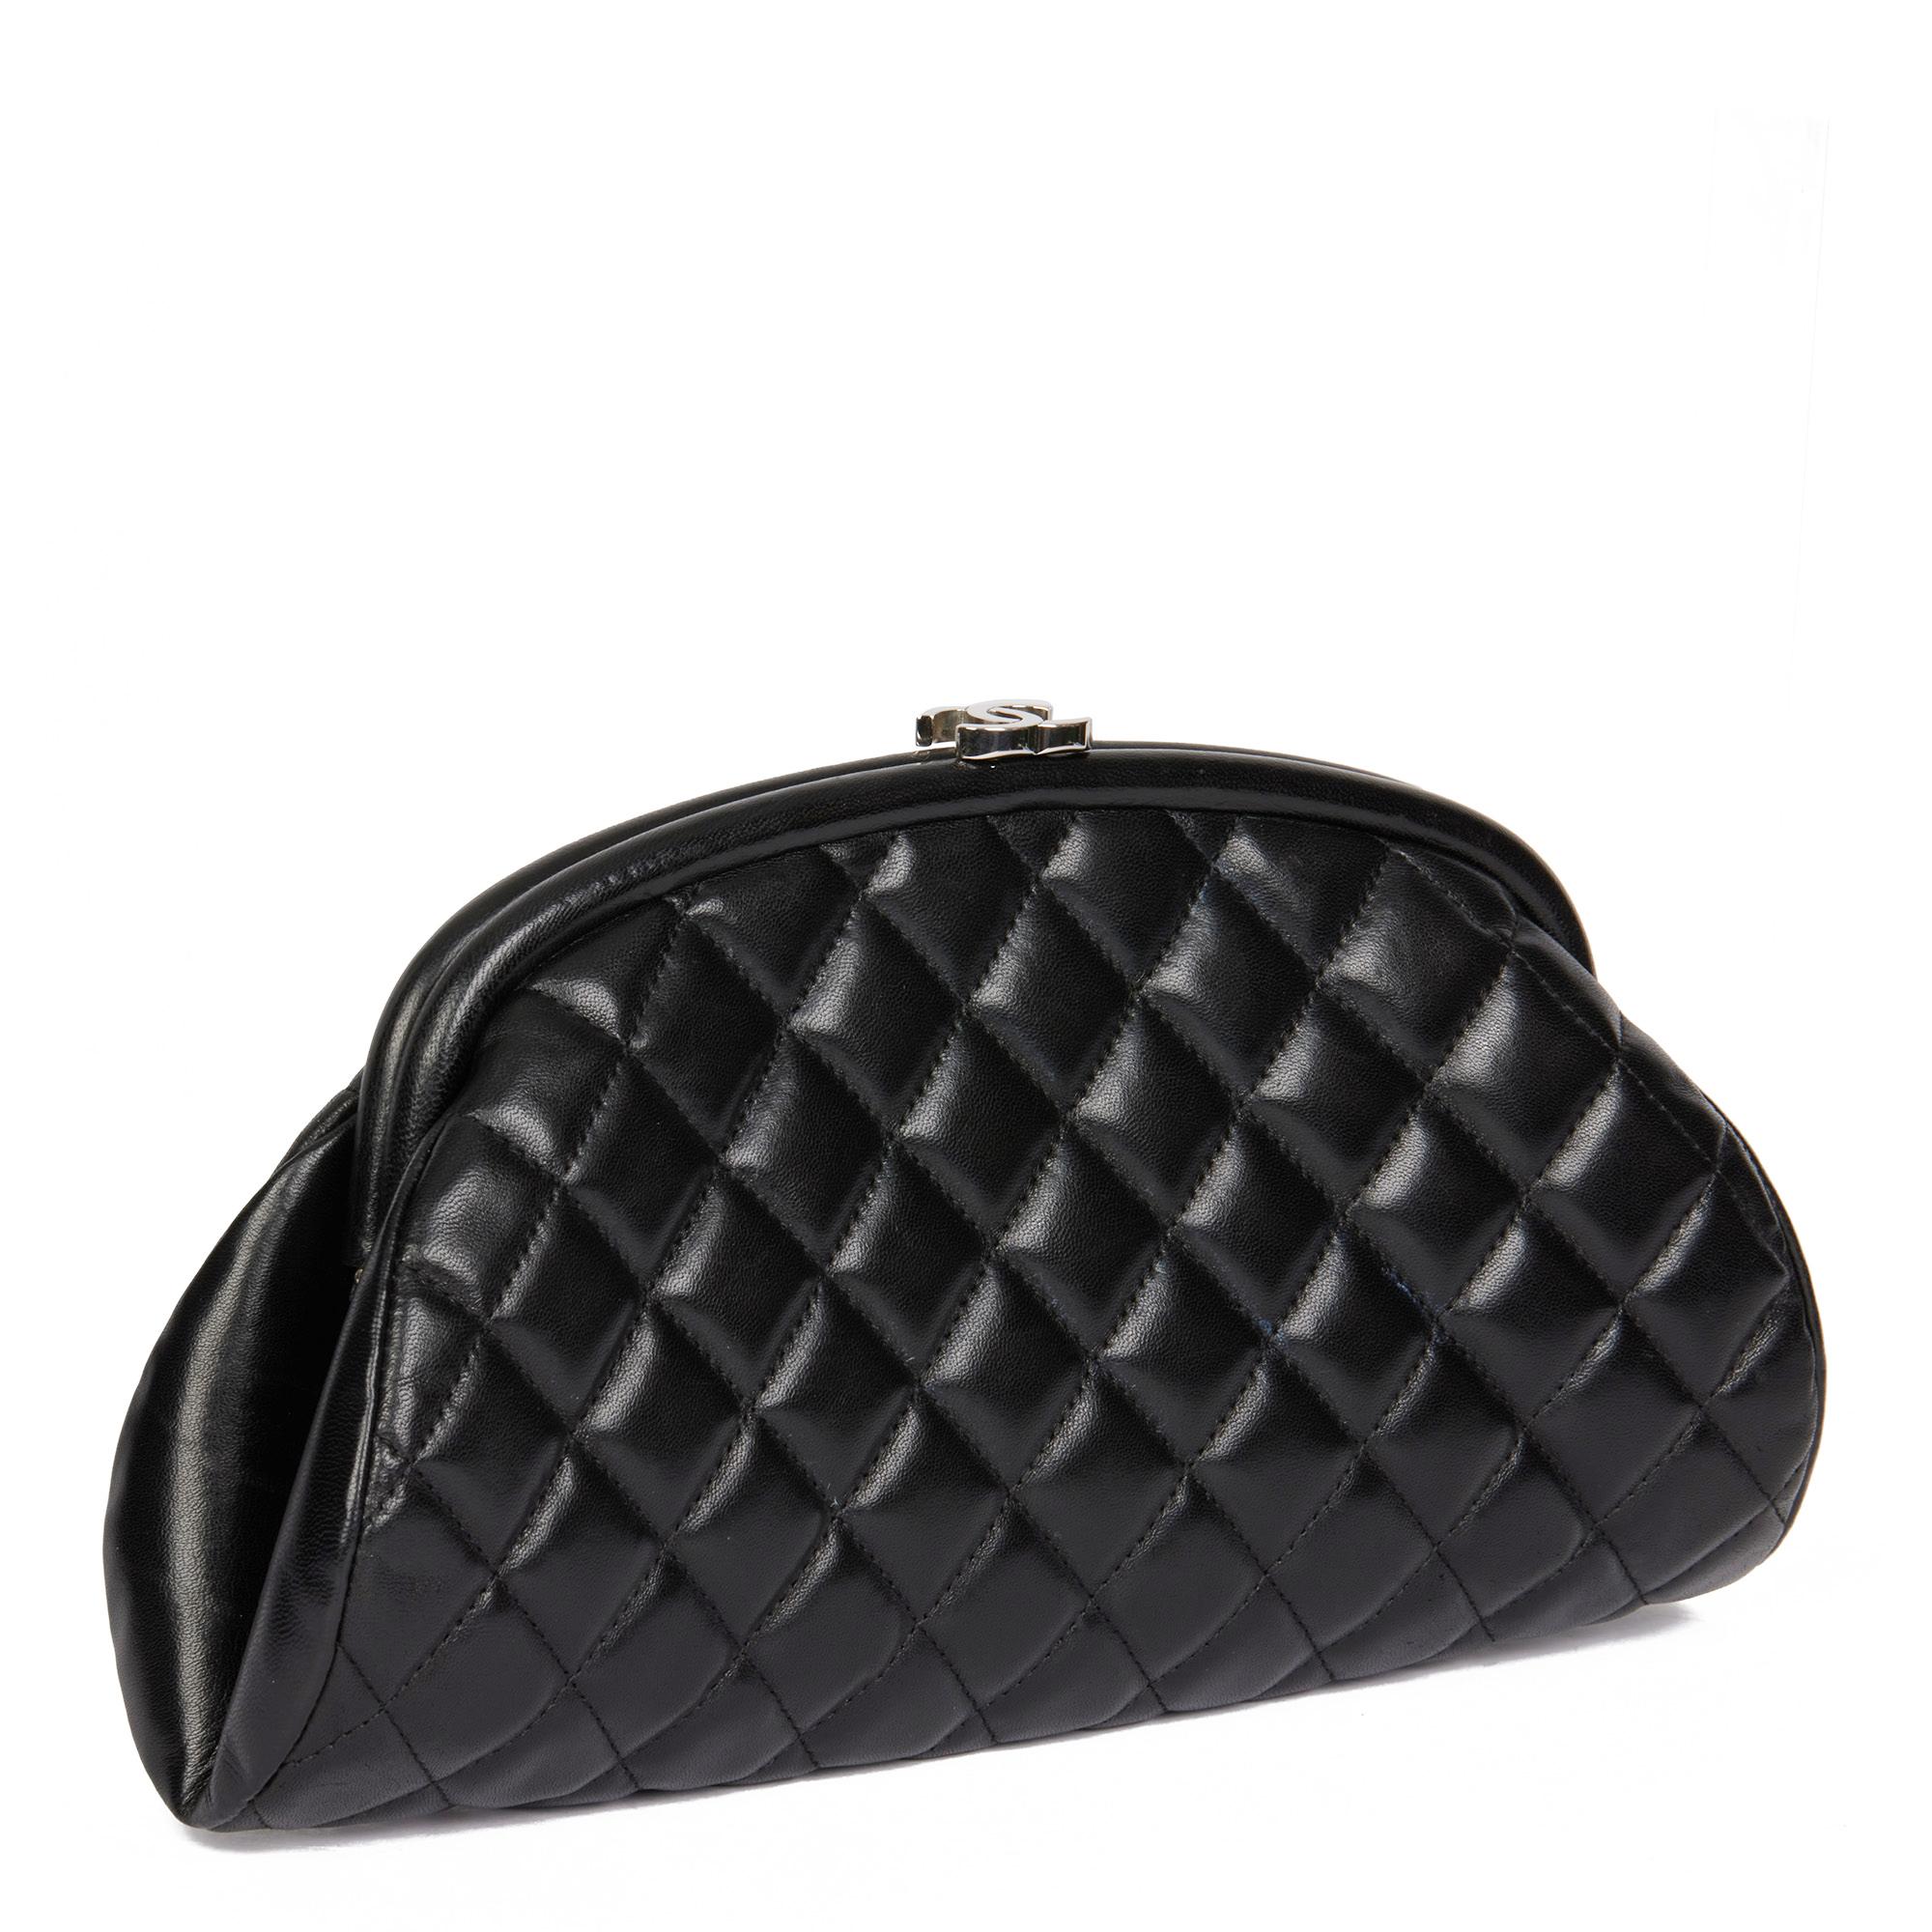 CHANEL
Black Quilted Lambskin Timeless Clutch

Xupes Reference: HB4700
Serial Number: 12068319
Age (Circa): 2008
Accompanied By: Chanel Box, Dust Bag
Authenticity Details: Serial Sticker (Made in Italy)
Gender: Ladies
Type: Clutch

Colour: